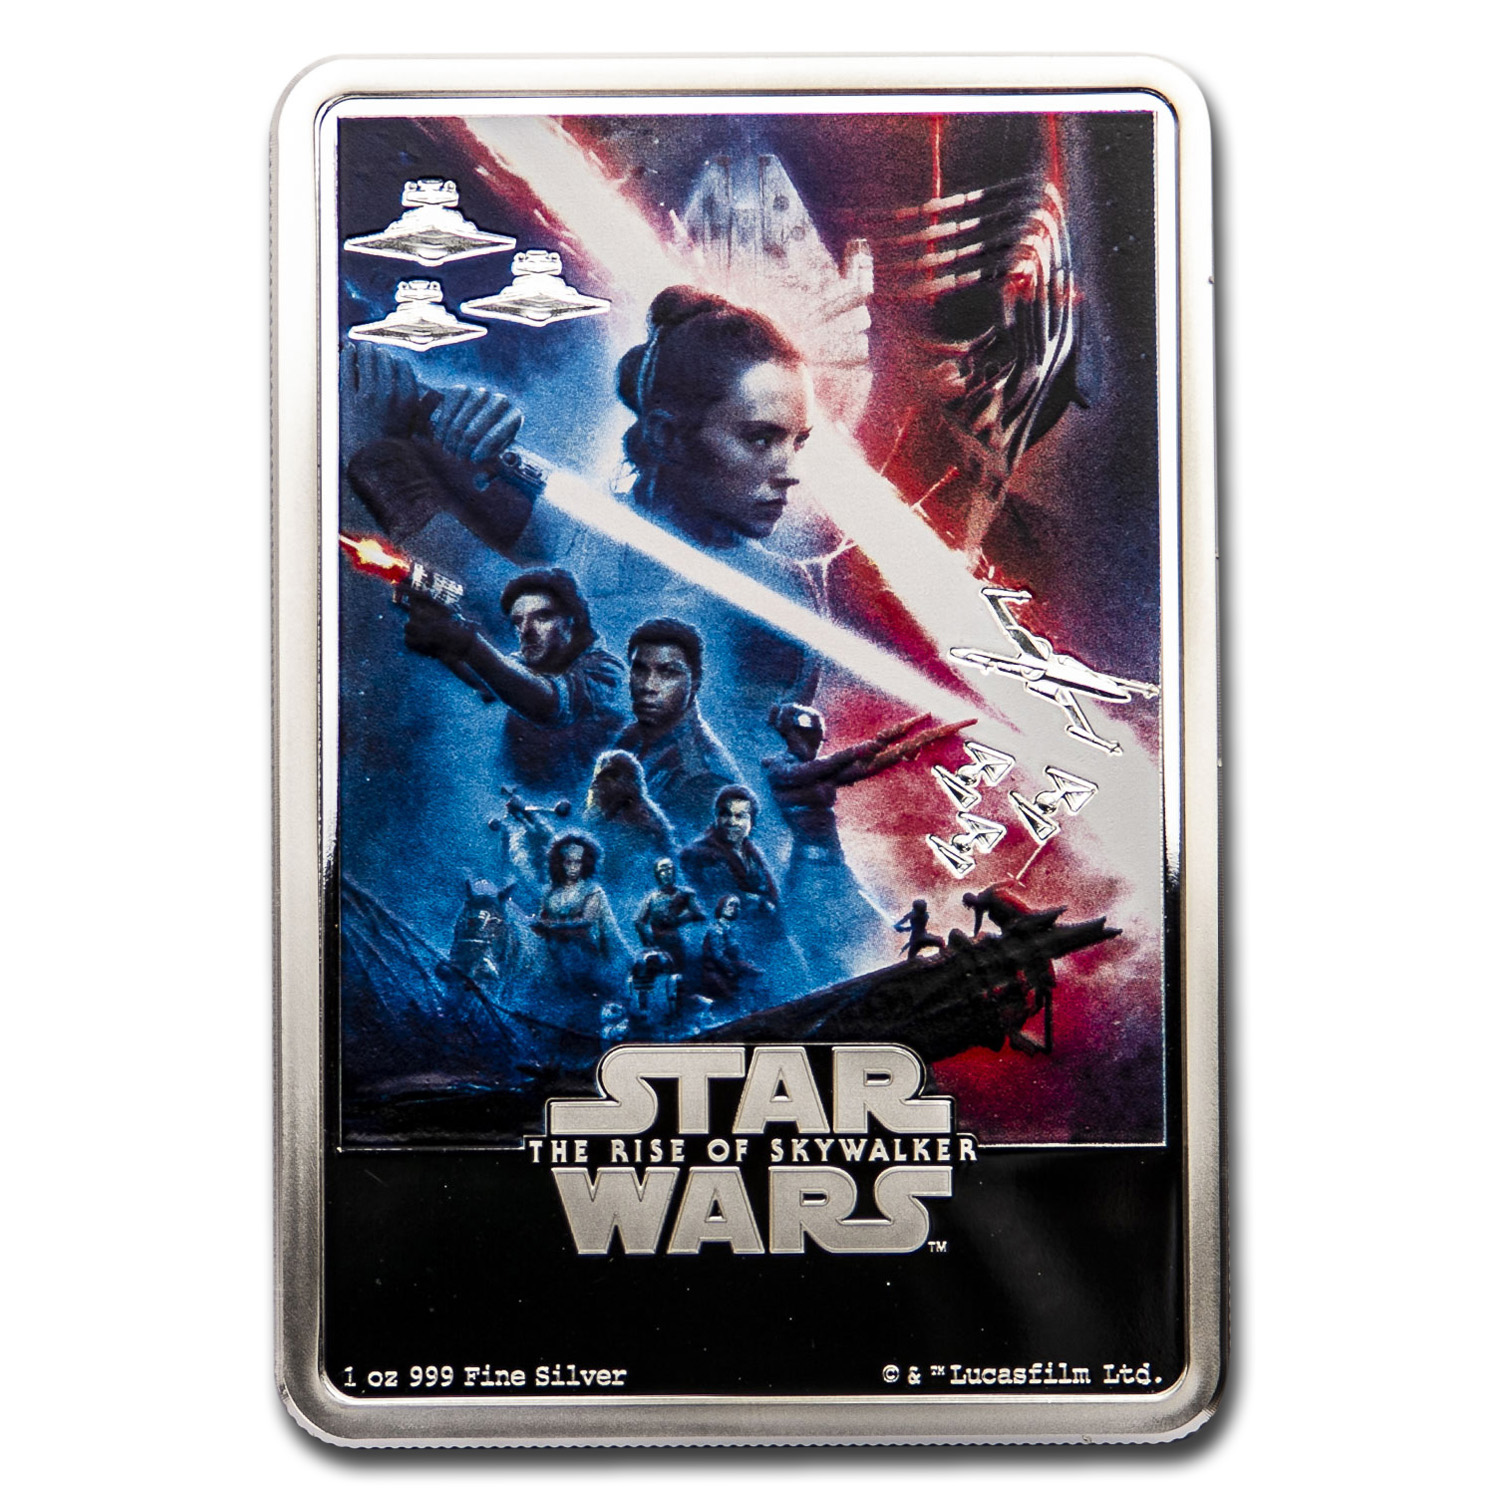 Star Wars The Rise of Skywalker Details about   Niue 2020-1 oz Silver Proof Coin 